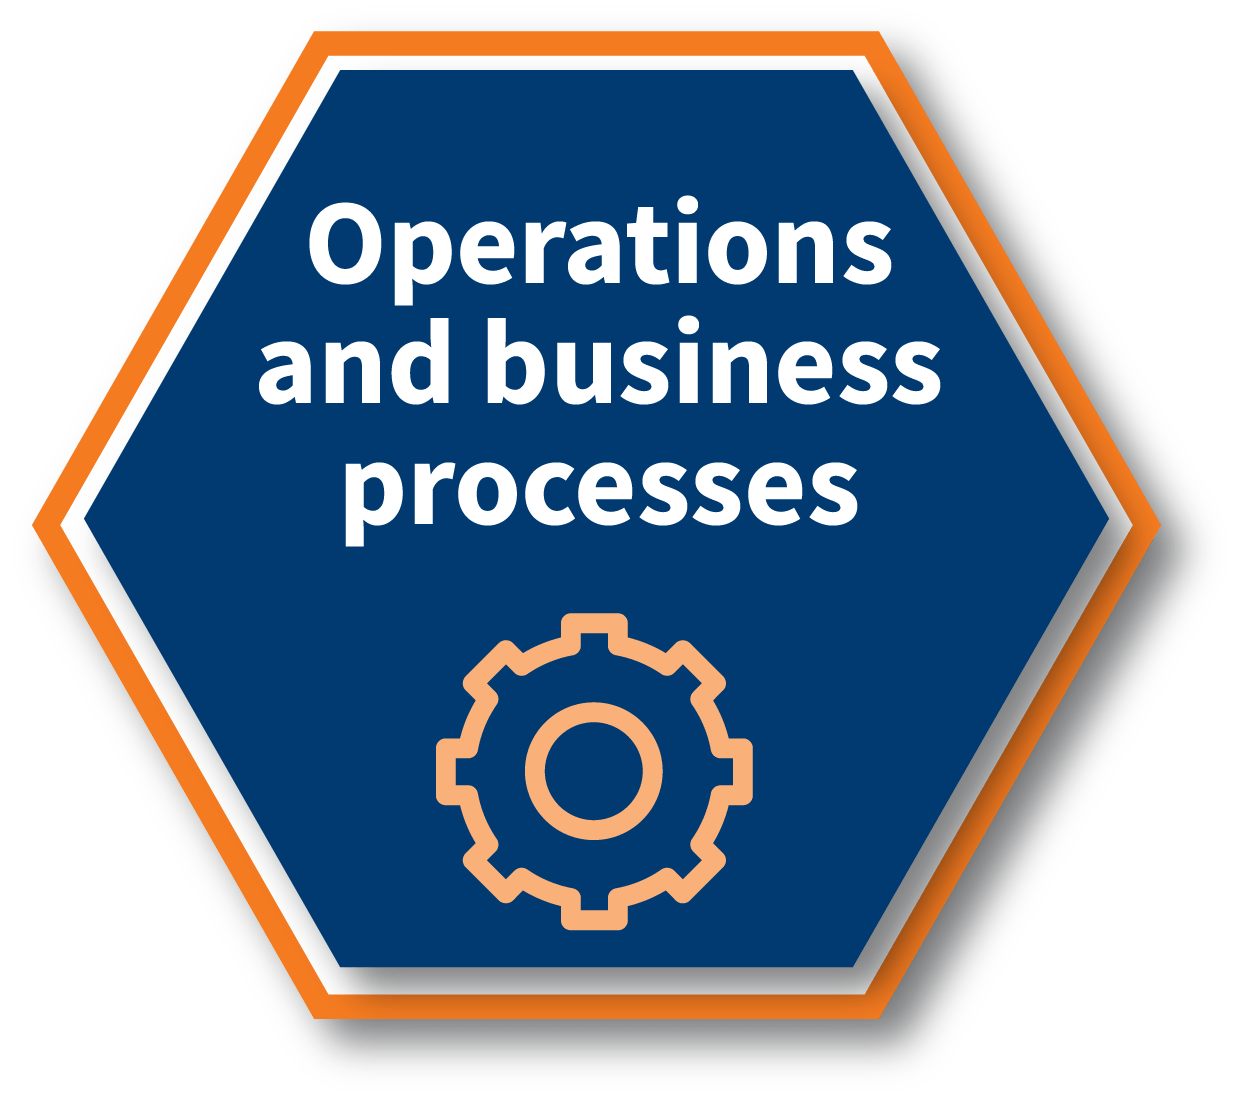 Operations and business procedures